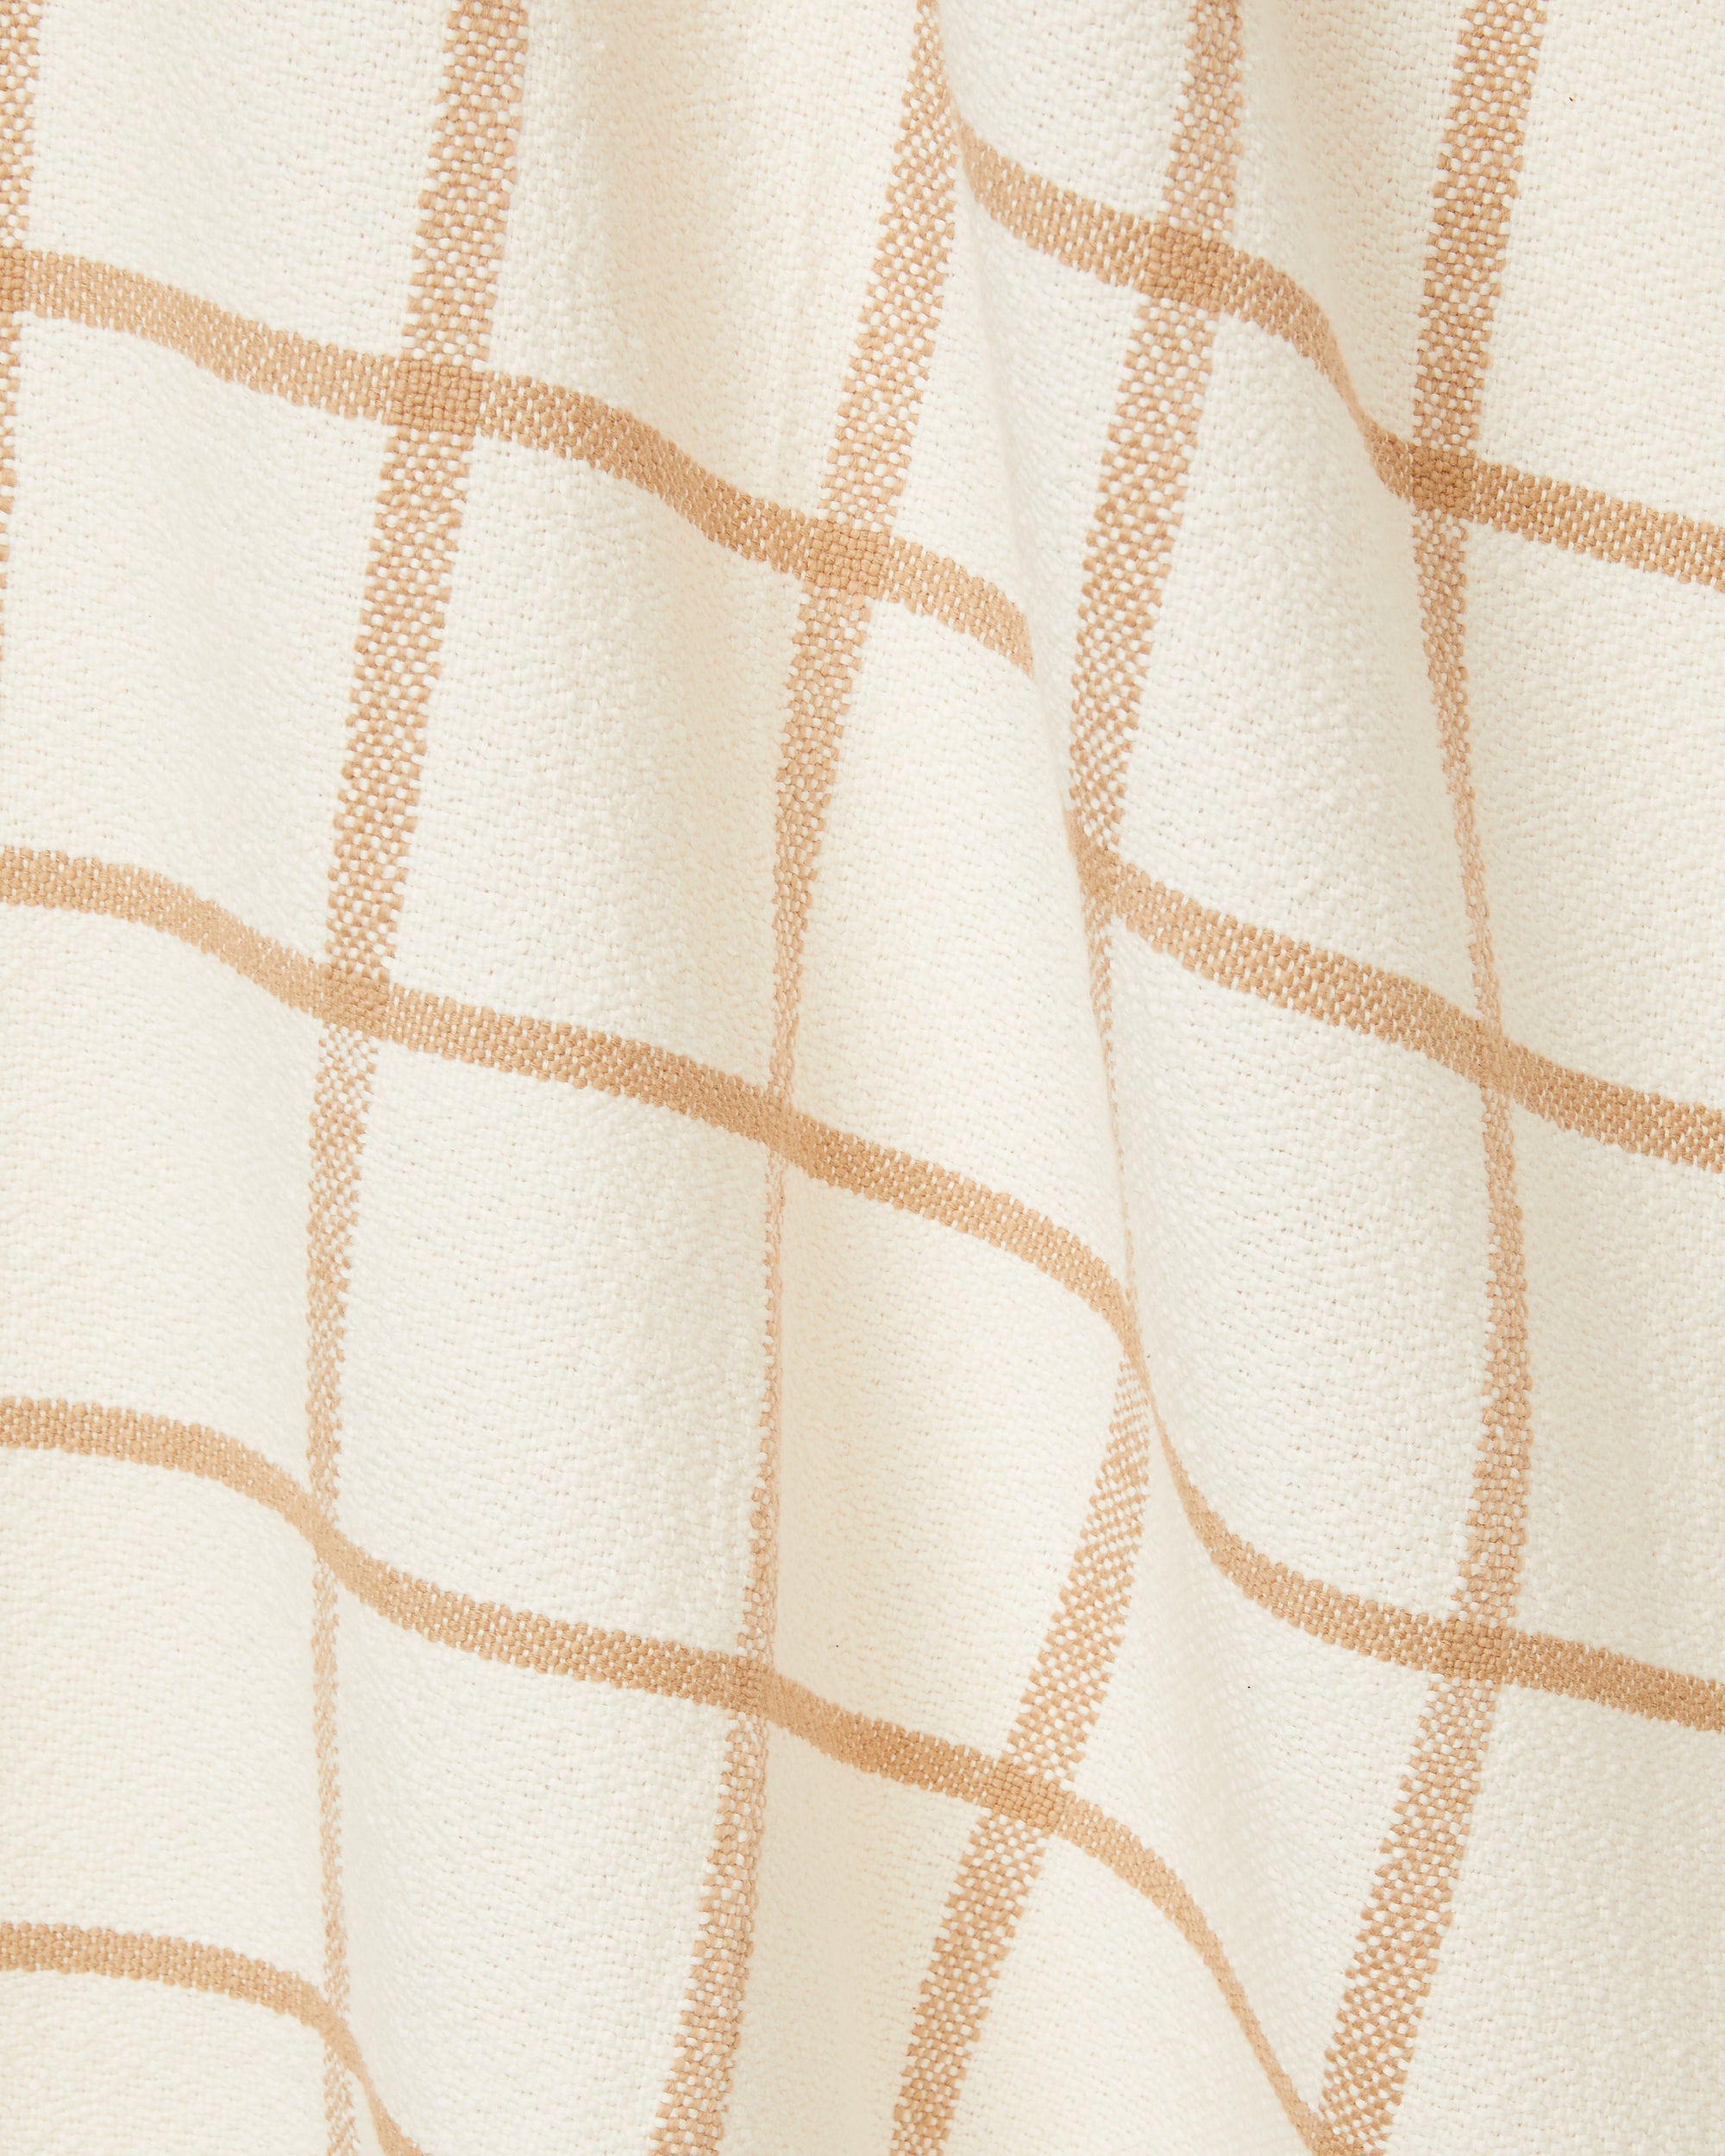 detail ethically handwoven GOTS-certified organic cotton MINNA Louise decorative throw blanket, neutral